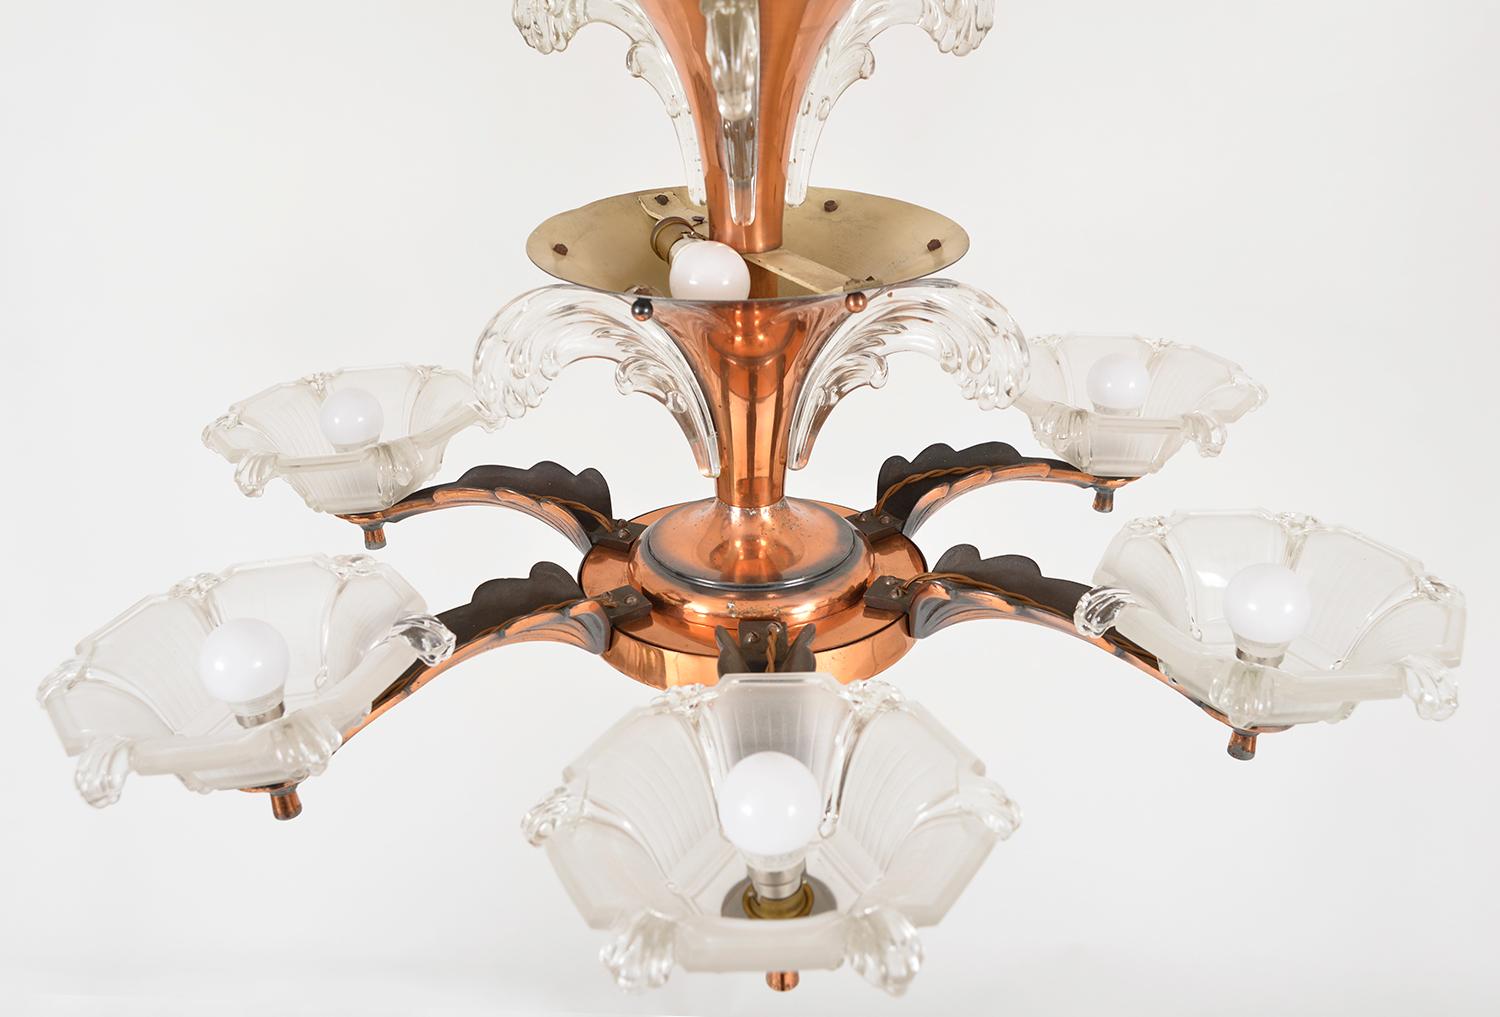 1930s French Art Deco 6-Arm Chandelier by Petitot and Ezan Copper and Glass For Sale 4